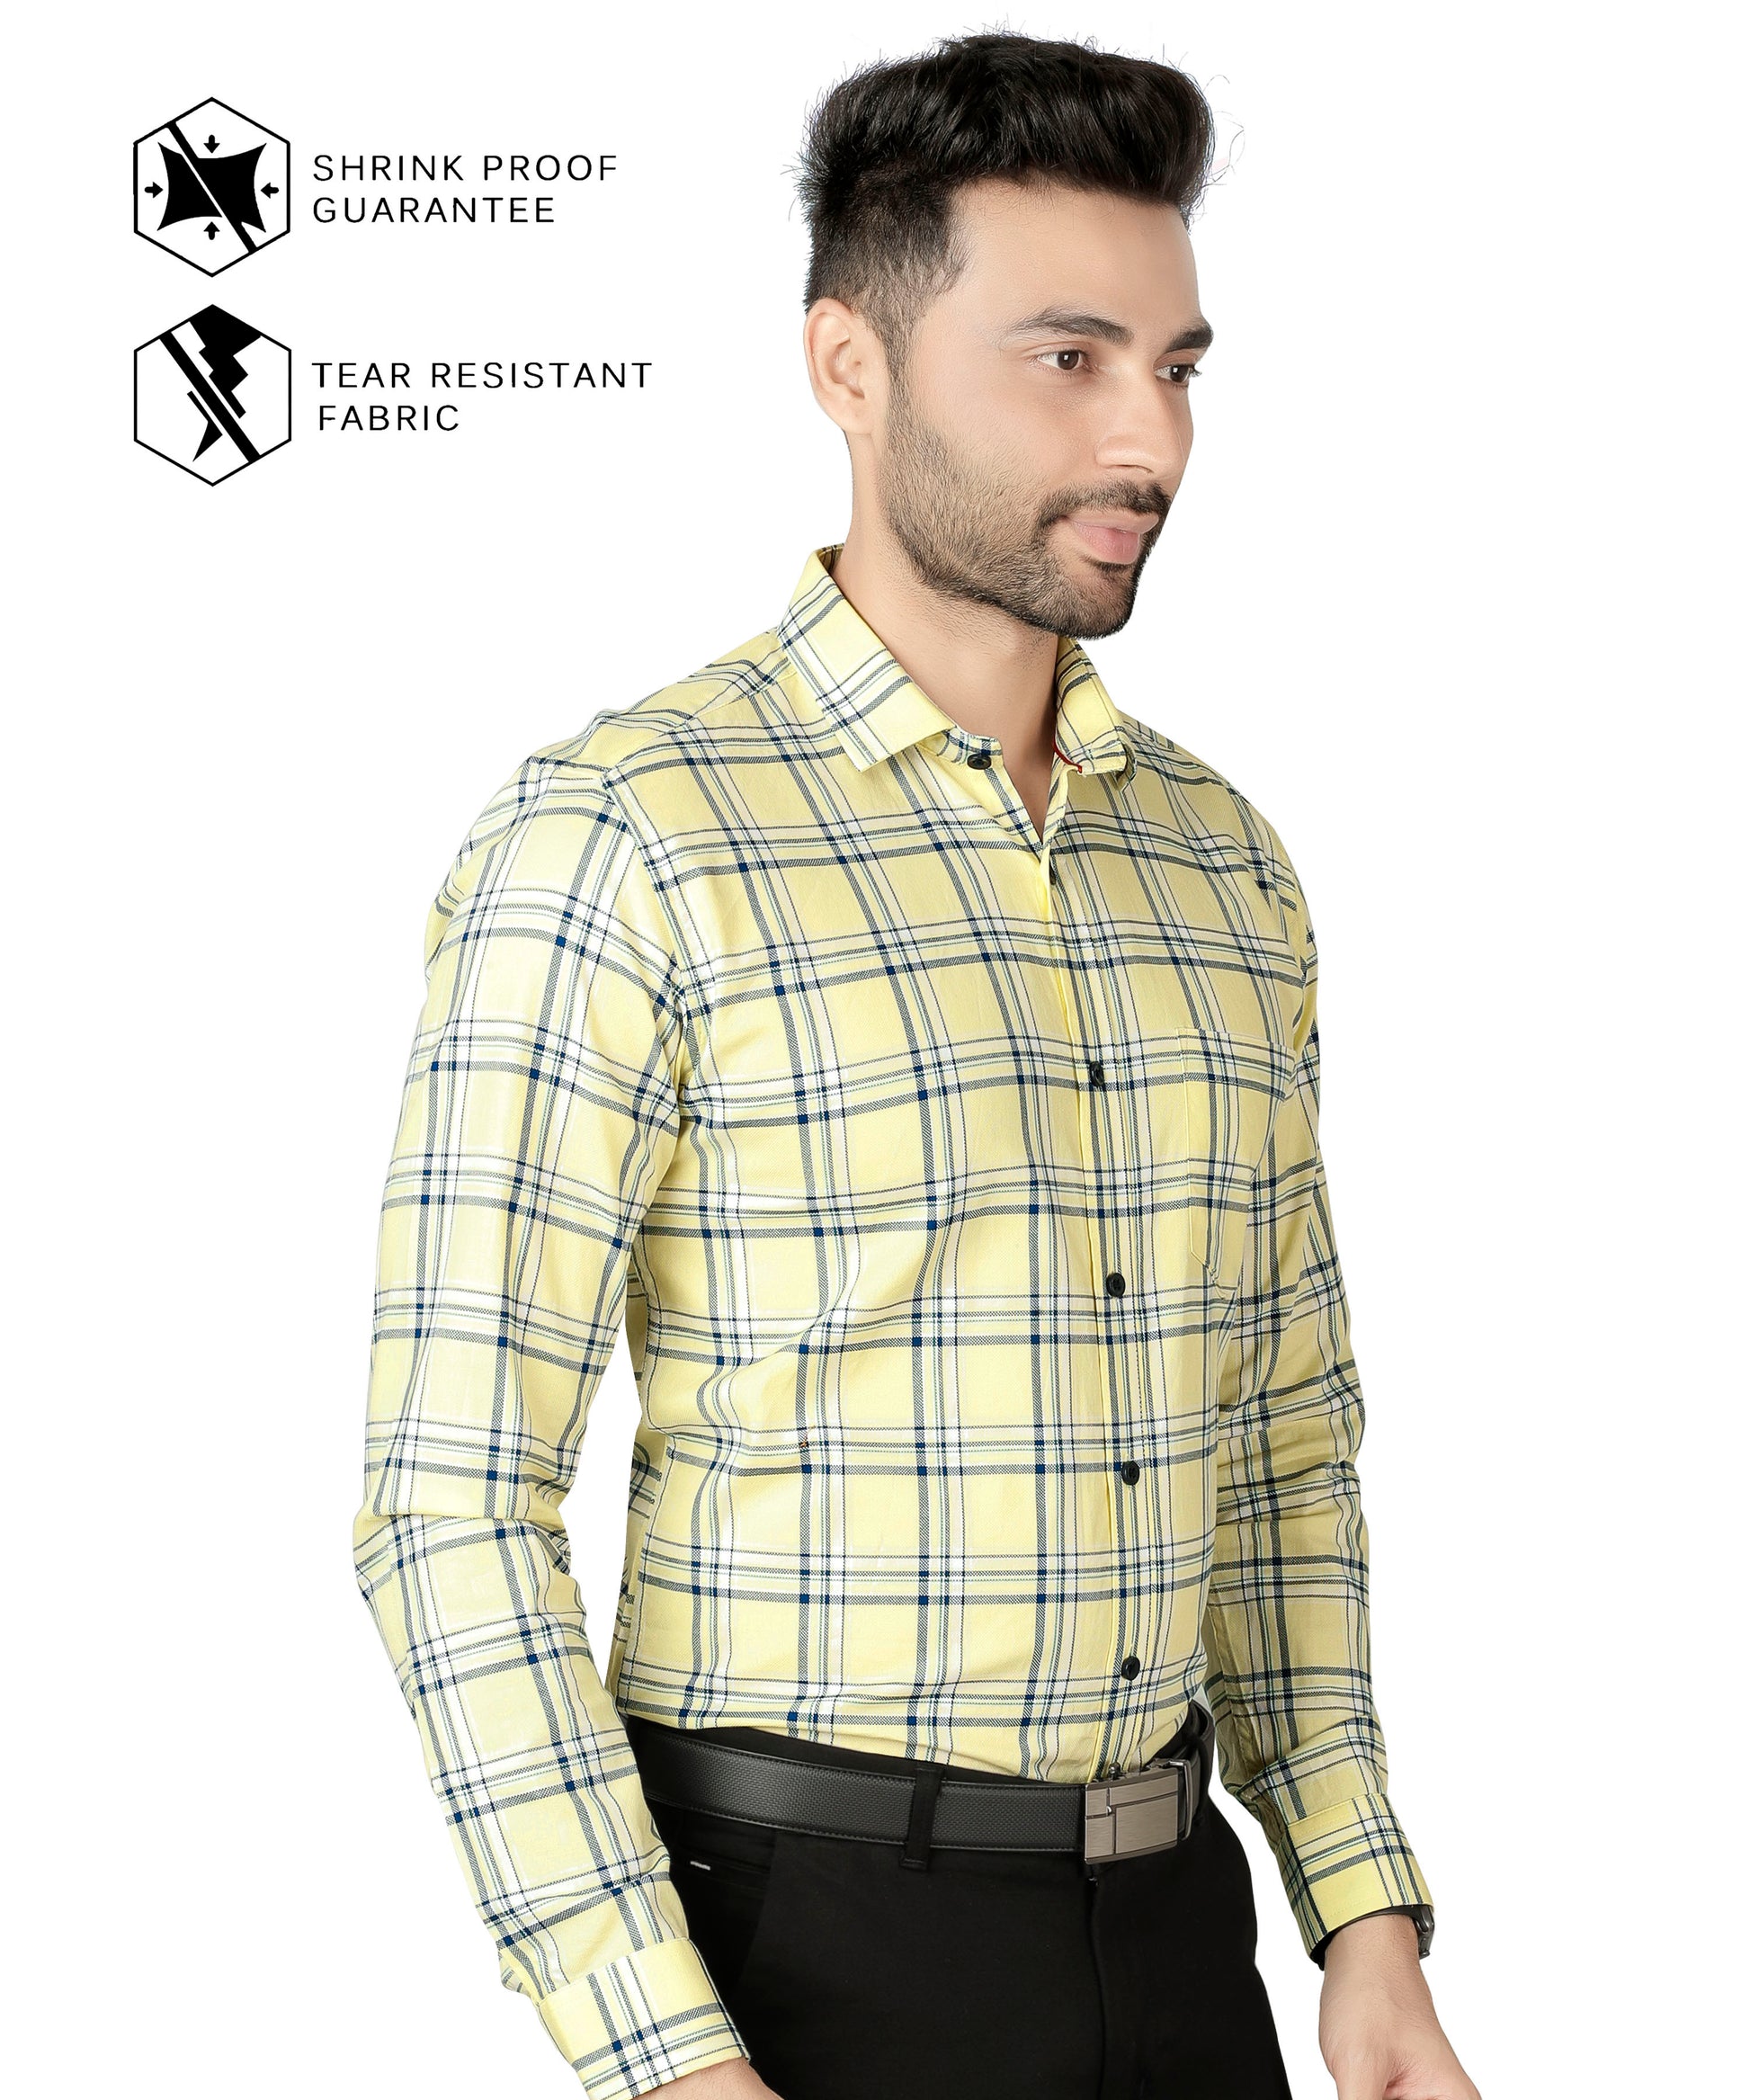 5thanfold Men's Formal Pure Cotton Full Sleeve Checkered Yellow Slim Fit Shirt